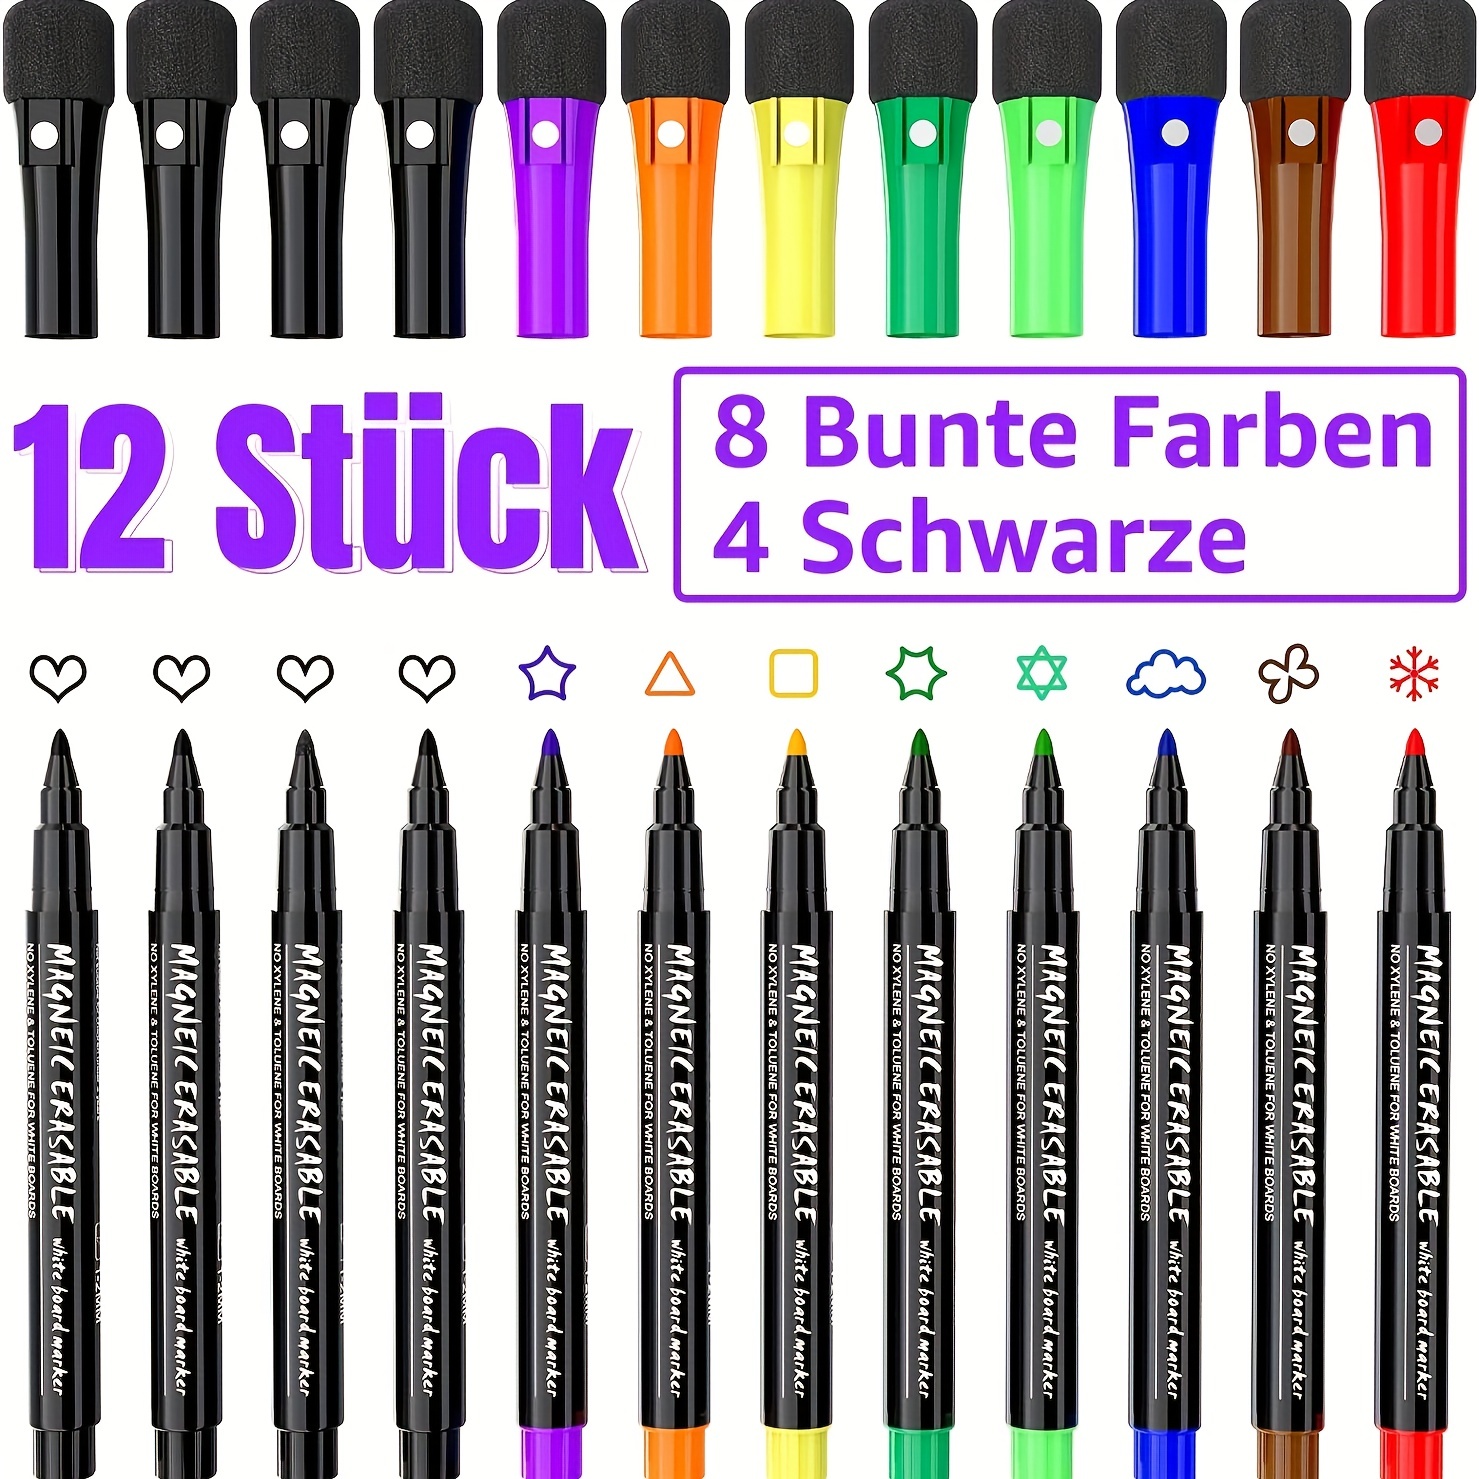 8 Colors Magnetic Dry Erase Markers Fine Tip Magnetic Erasable Whiteboard  Pens for Kids Teachers Office